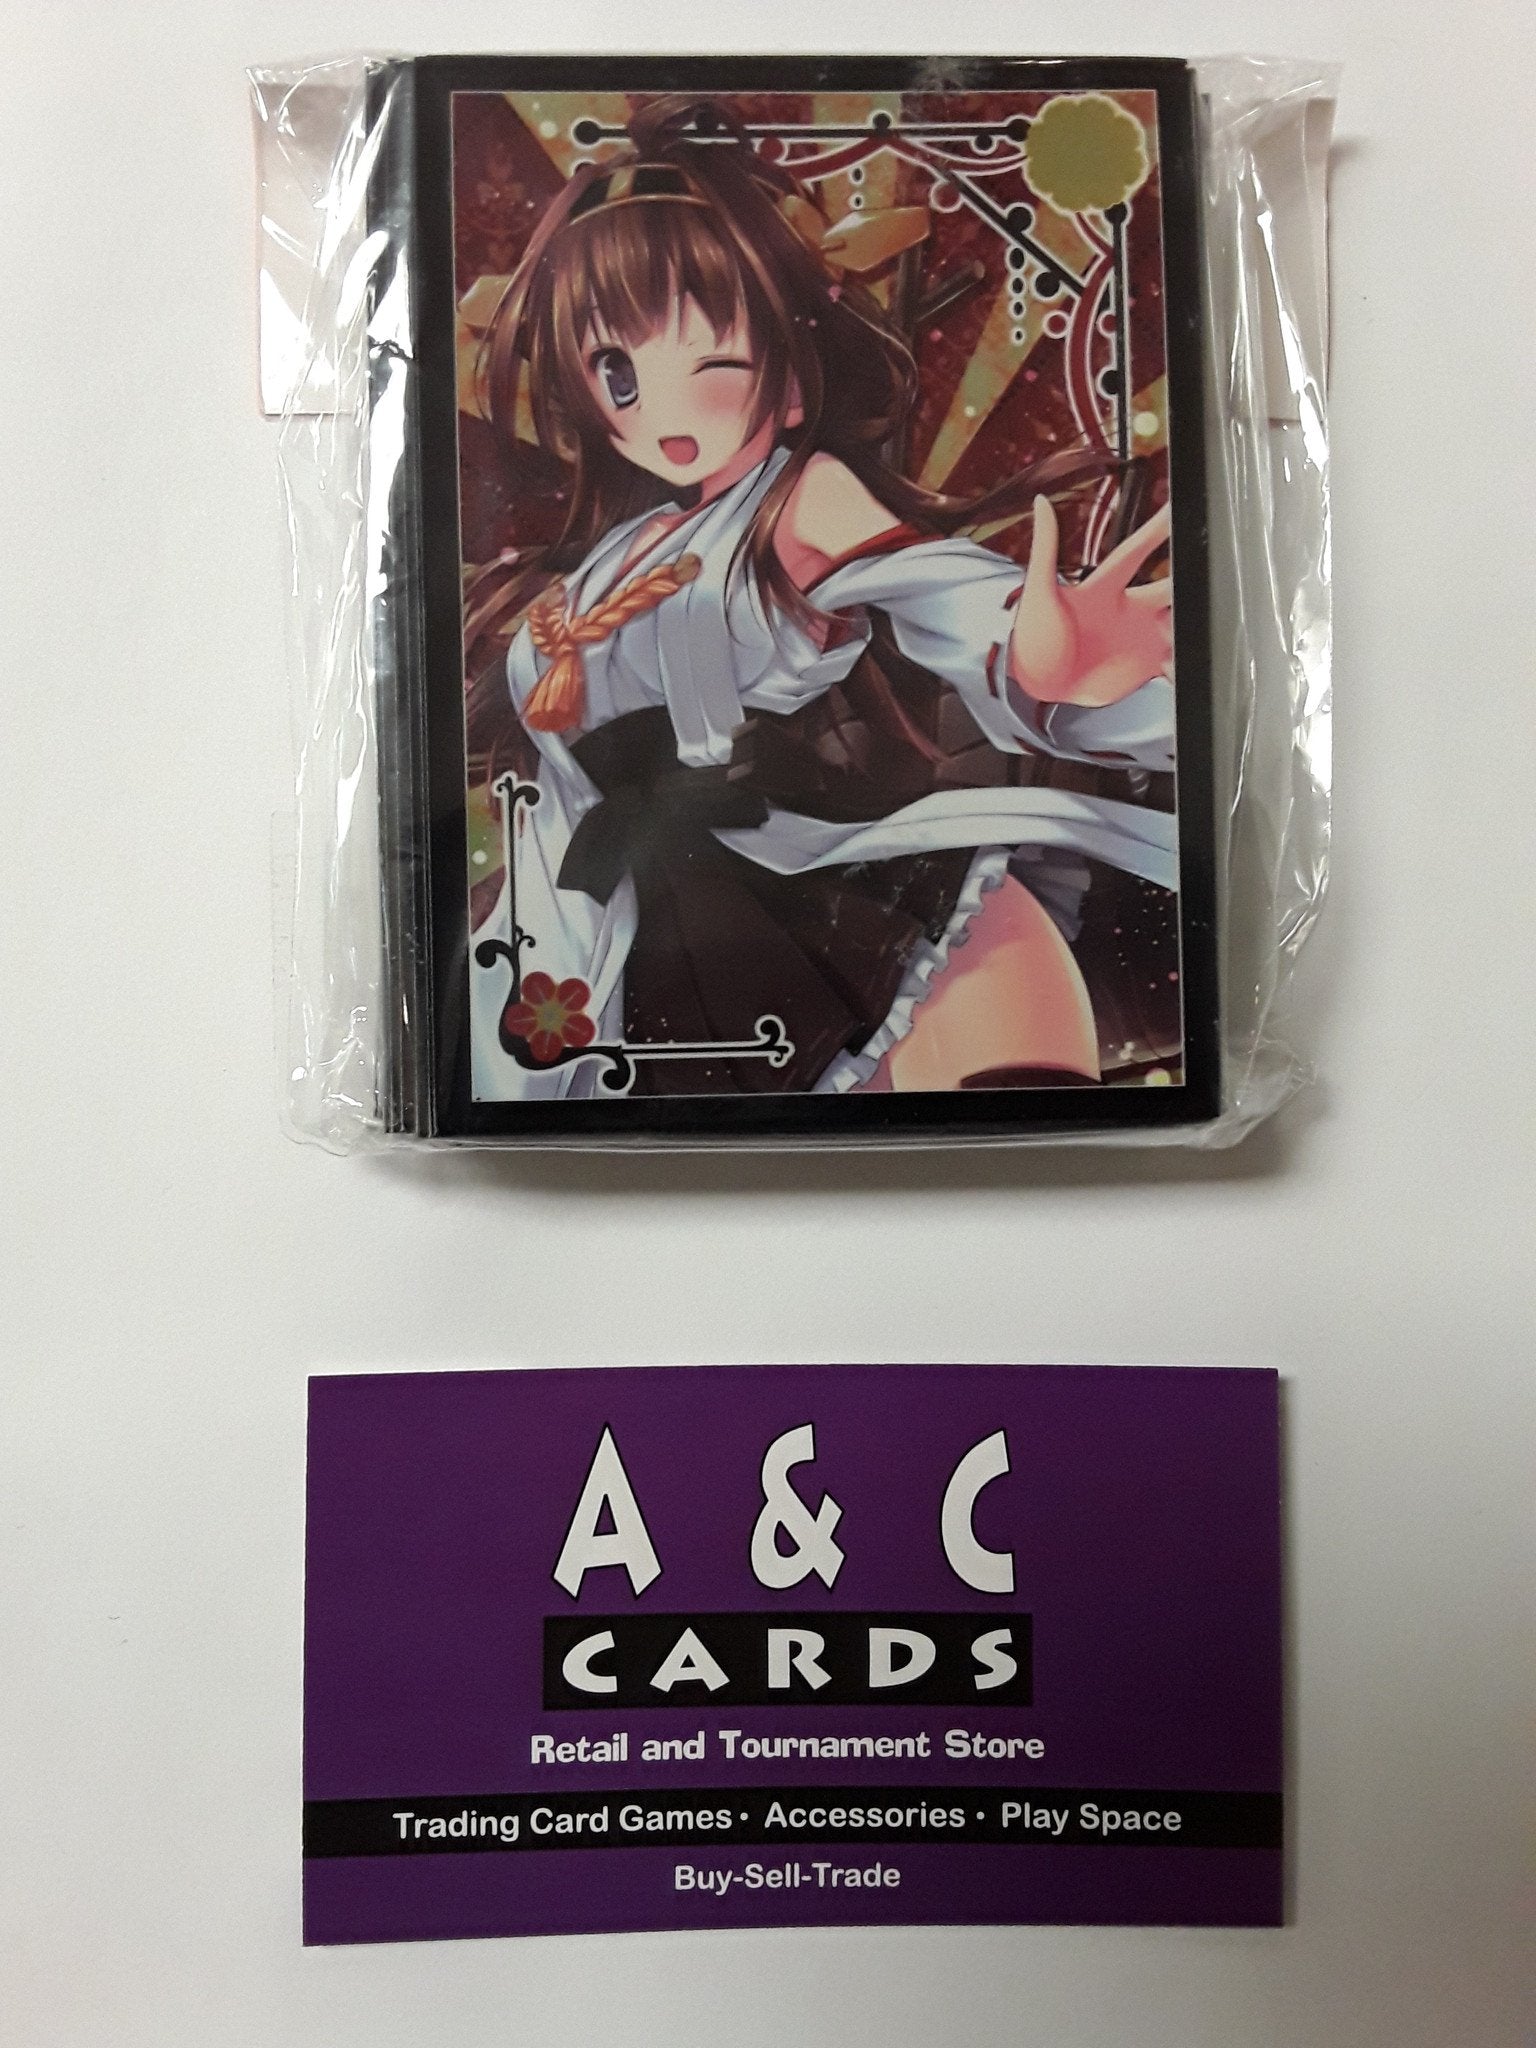 Character Sleeves "Kongo" #5 - 1 pack of Standard Size Sleeves - Kantai Collection